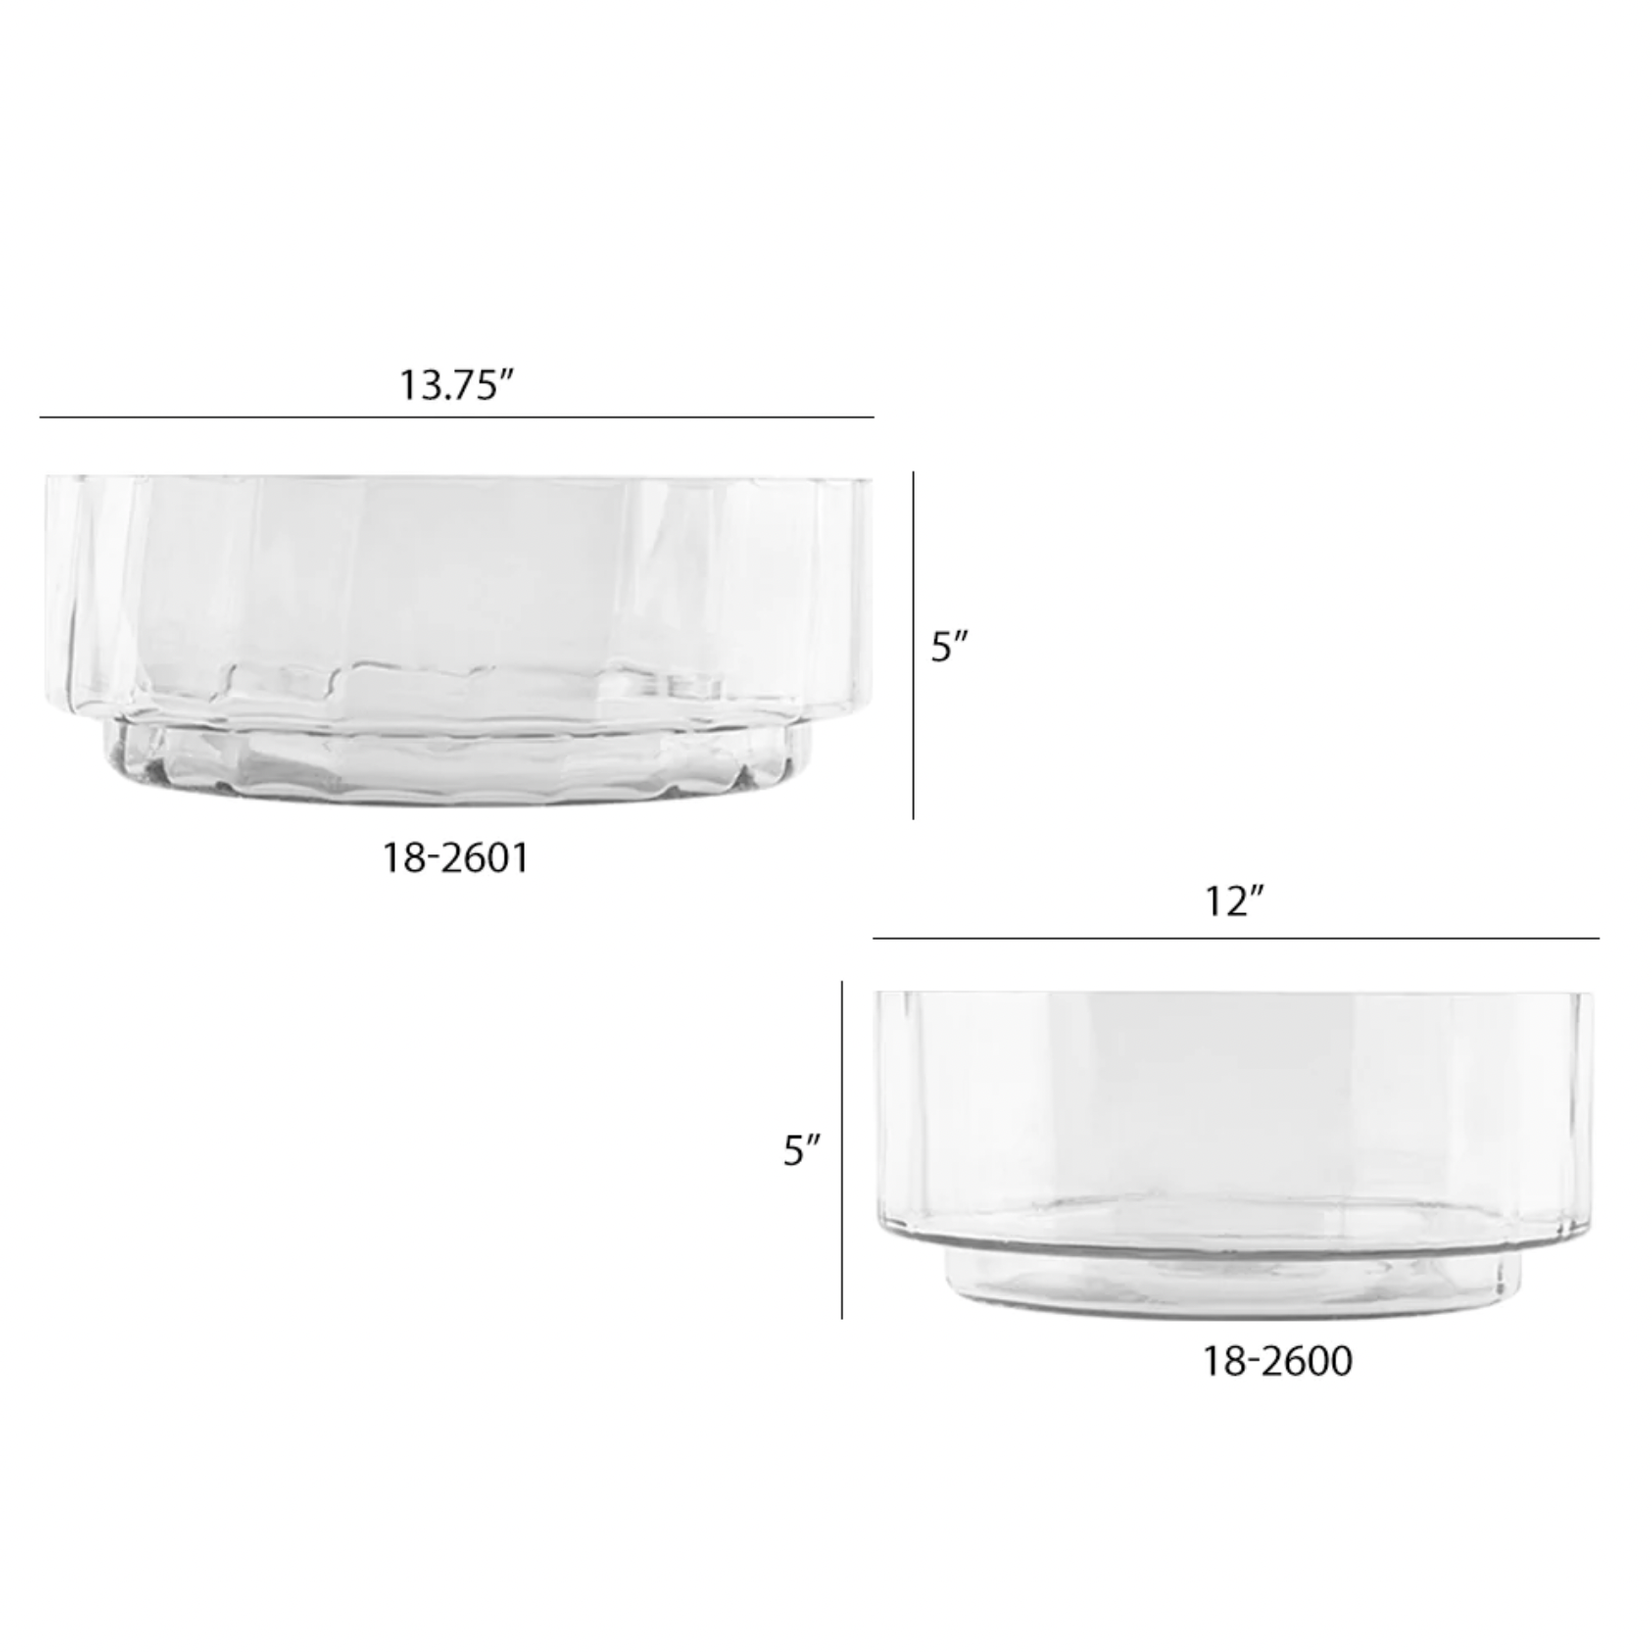 40% off was $52.49 now $31.49. 5”h x 13.75” LOW GLASS CYLINDER BOWL